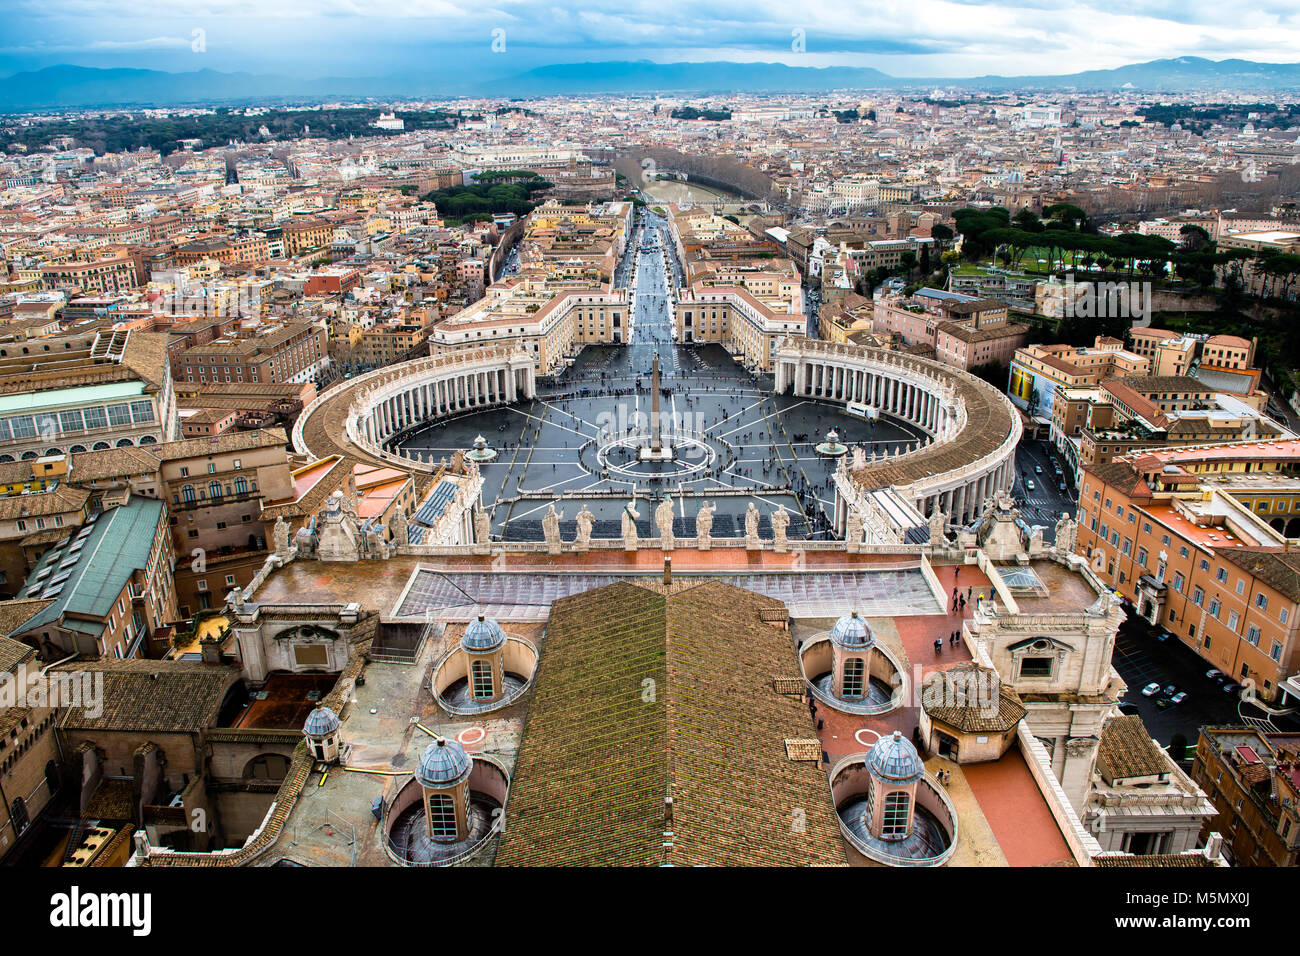 Square And St Peter S Basilica At Vatican In Rome Italy Stock Photo Alamy